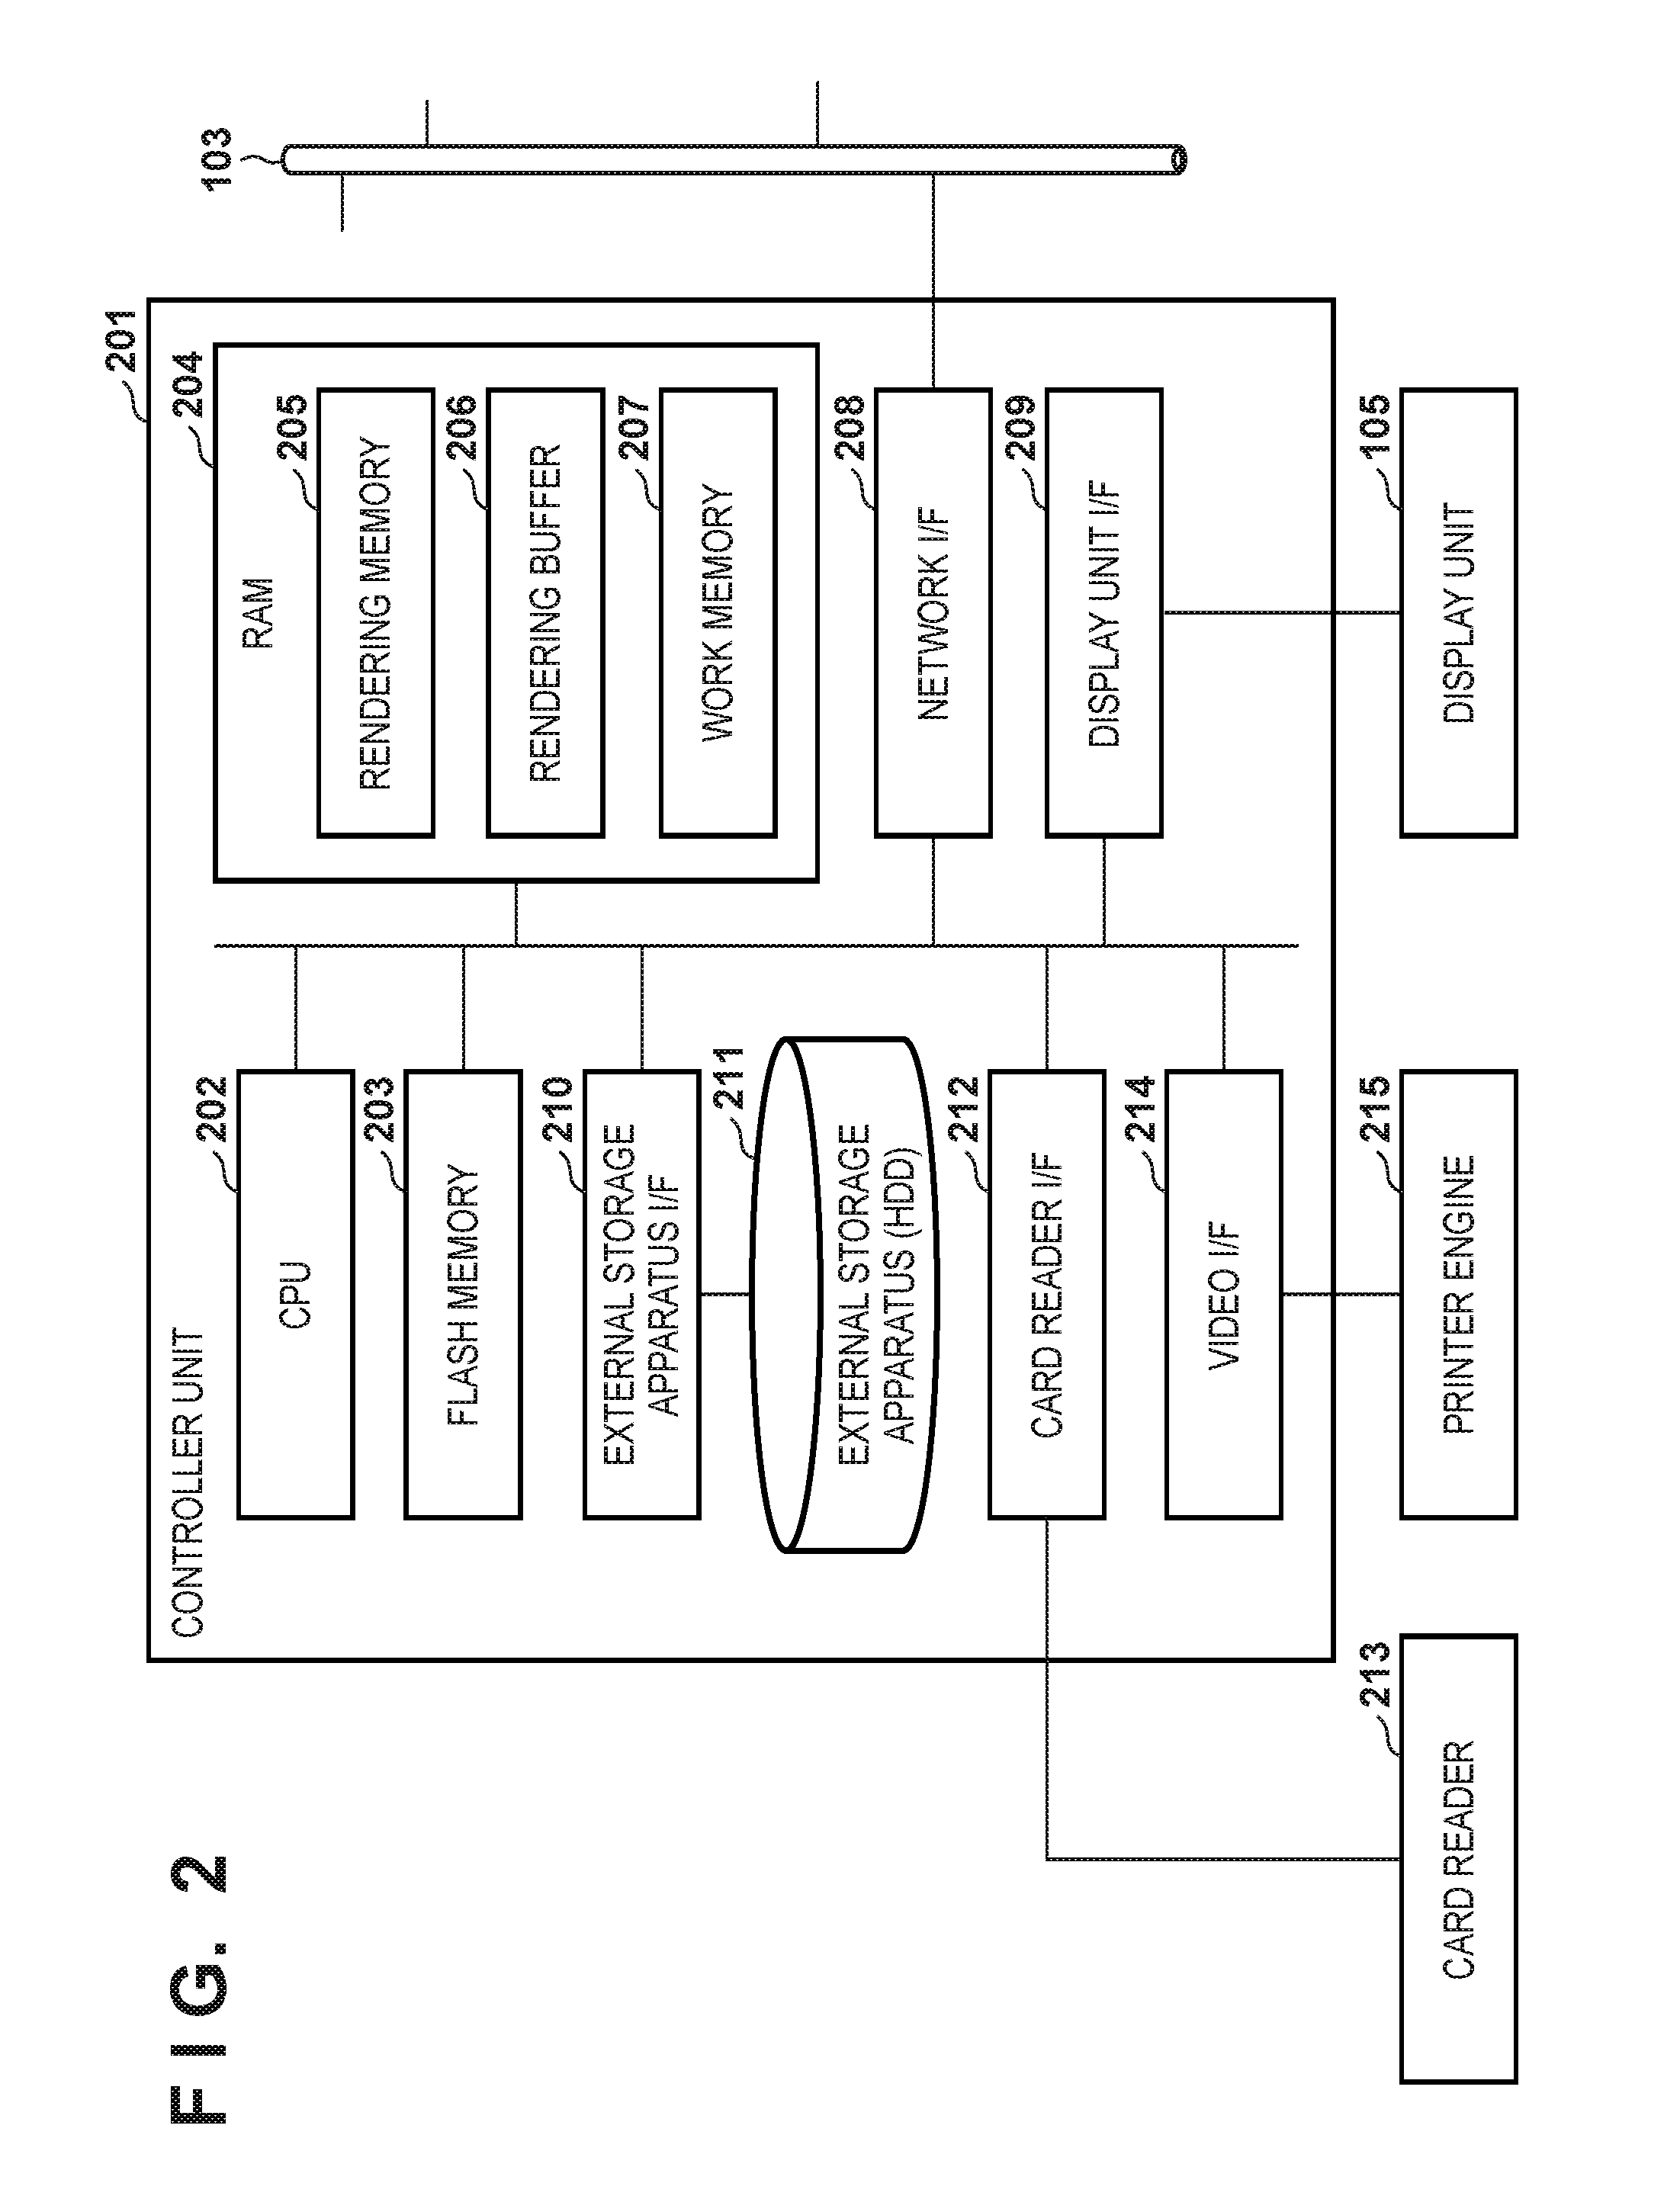 Image forming apparatus, method of controlling the same, and storage medium